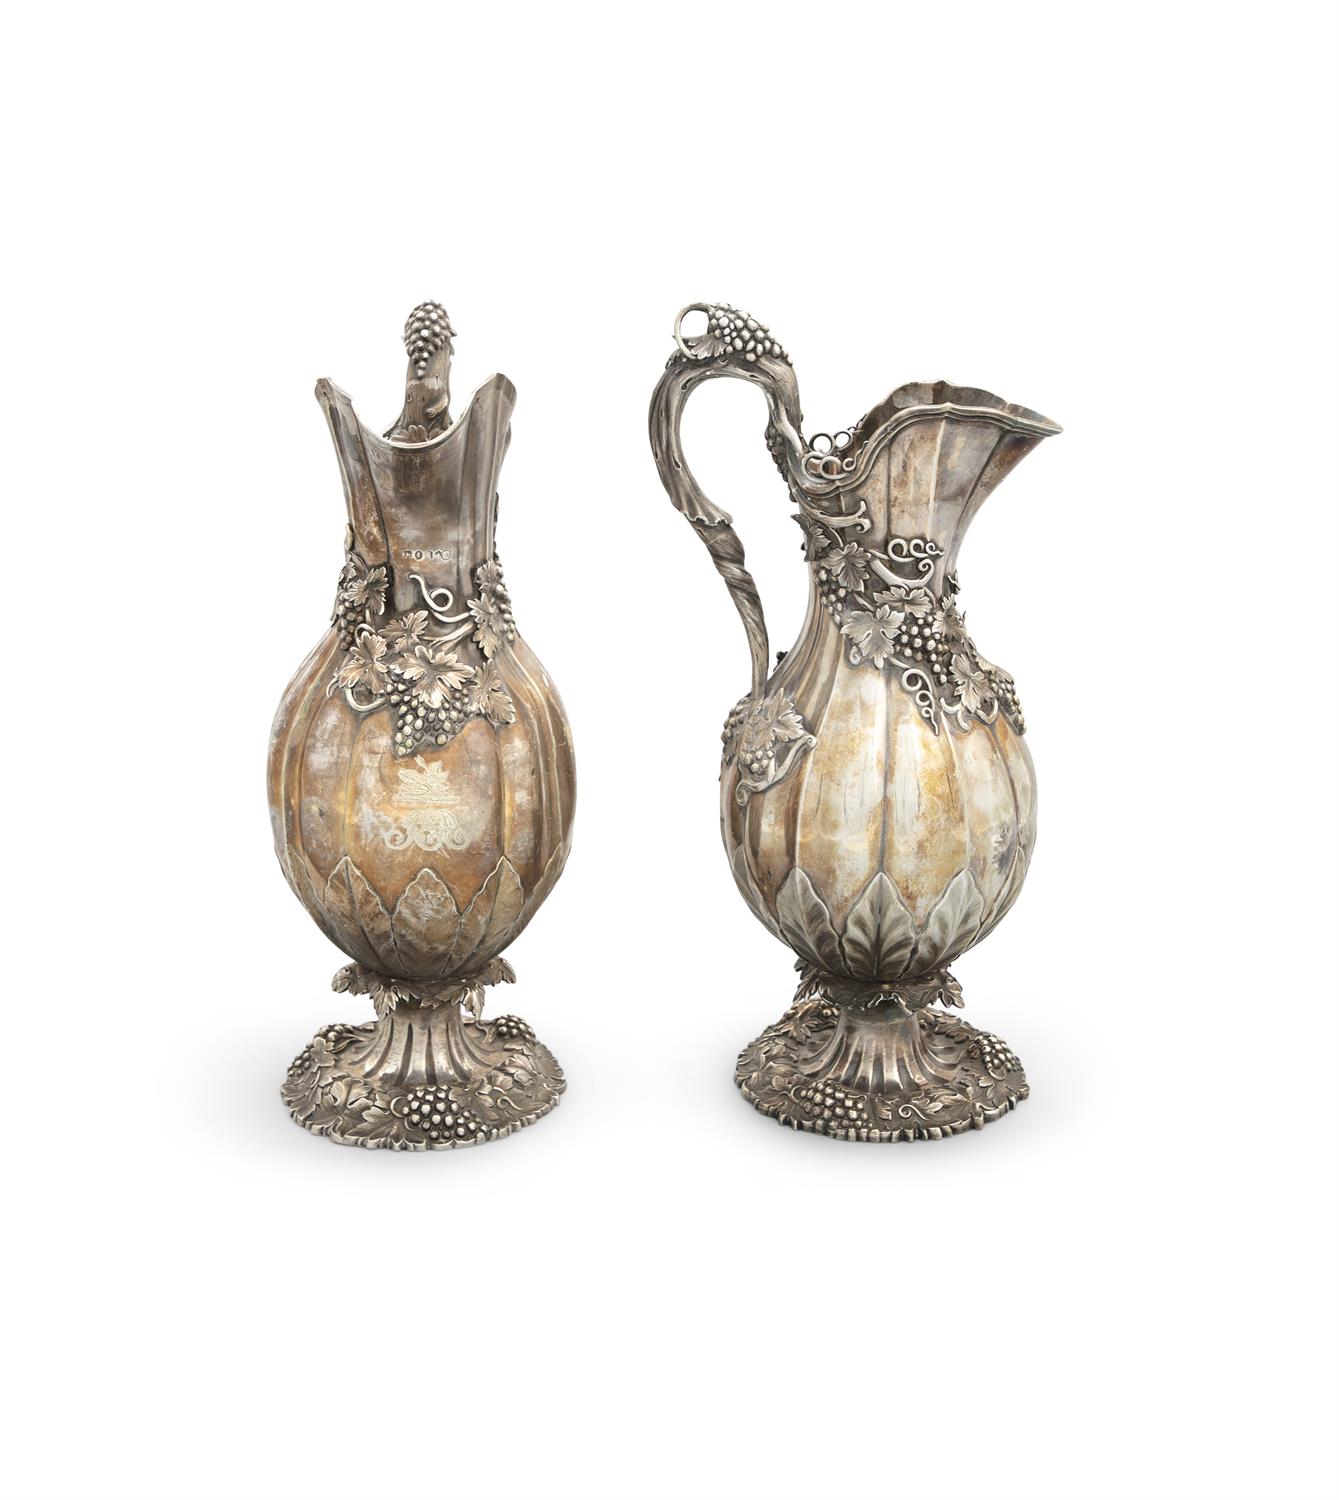 A PAIR OF VICTORIAN IRISH SILVER WINE EWERS, Dublin c. 1840, makers mark of James Fray, each of - Image 2 of 3